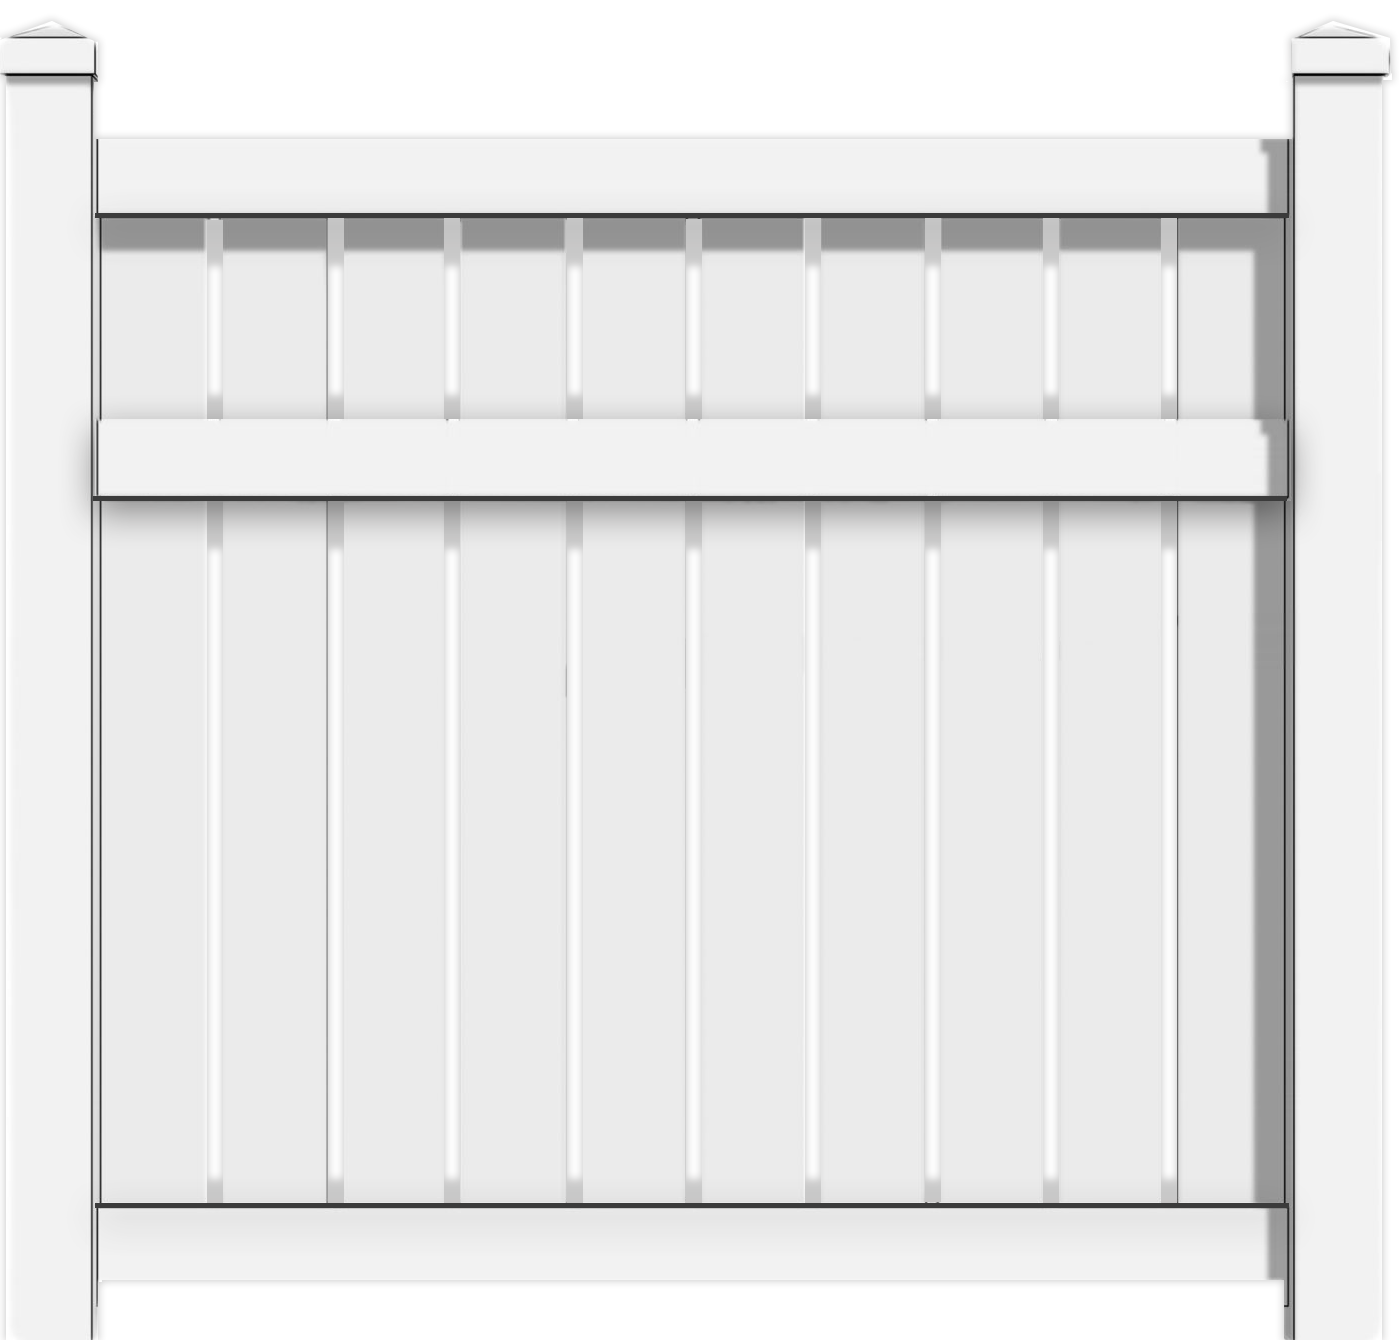 Rendering of a Standard Vinyl Semi-Privacy Fence from Fence Supply Company Serving Southwest Florida, Central Florida, & South Florida